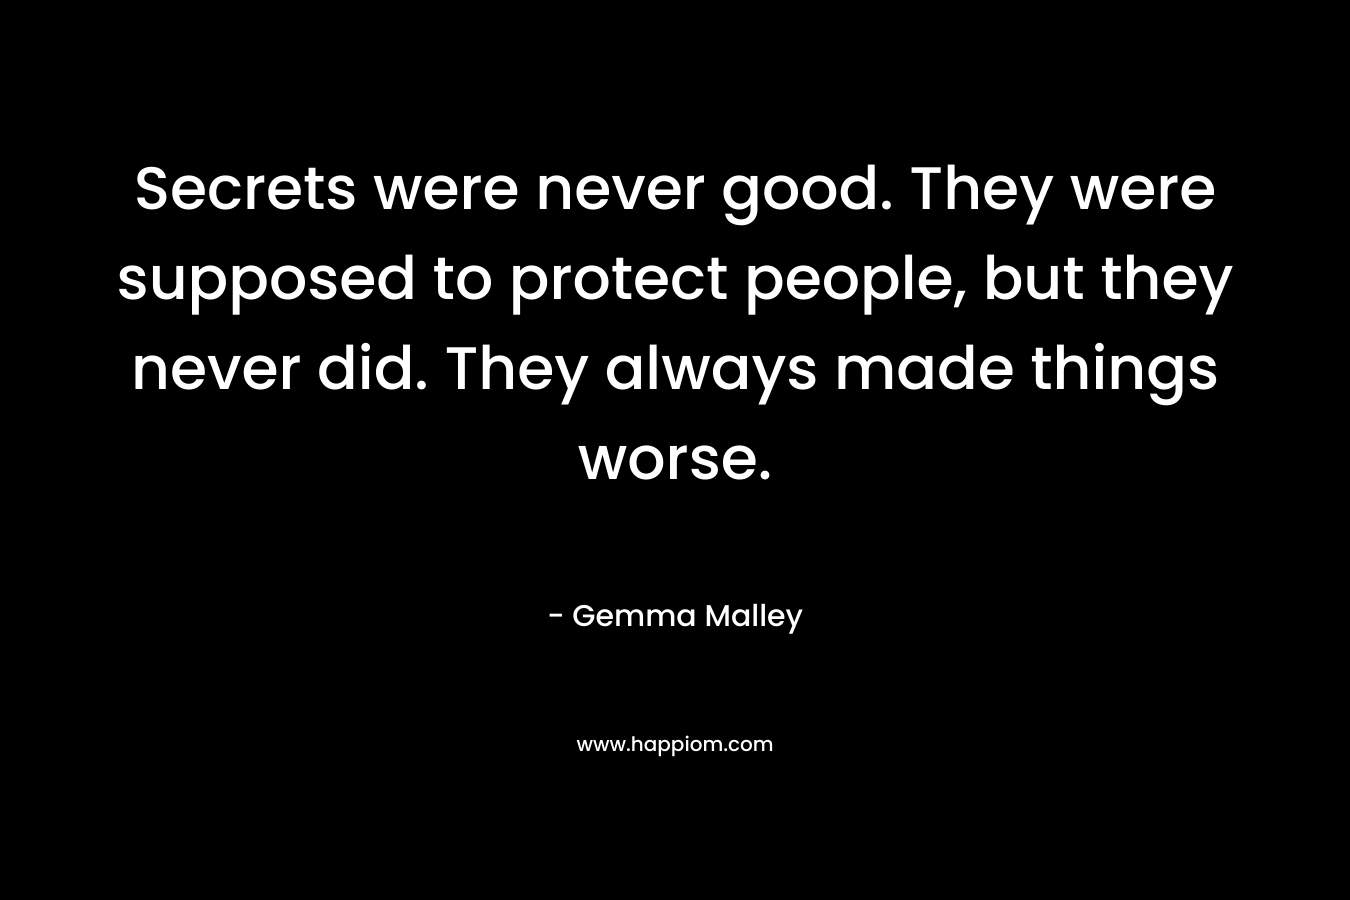 Secrets were never good. They were supposed to protect people, but they never did. They always made things worse. – Gemma Malley